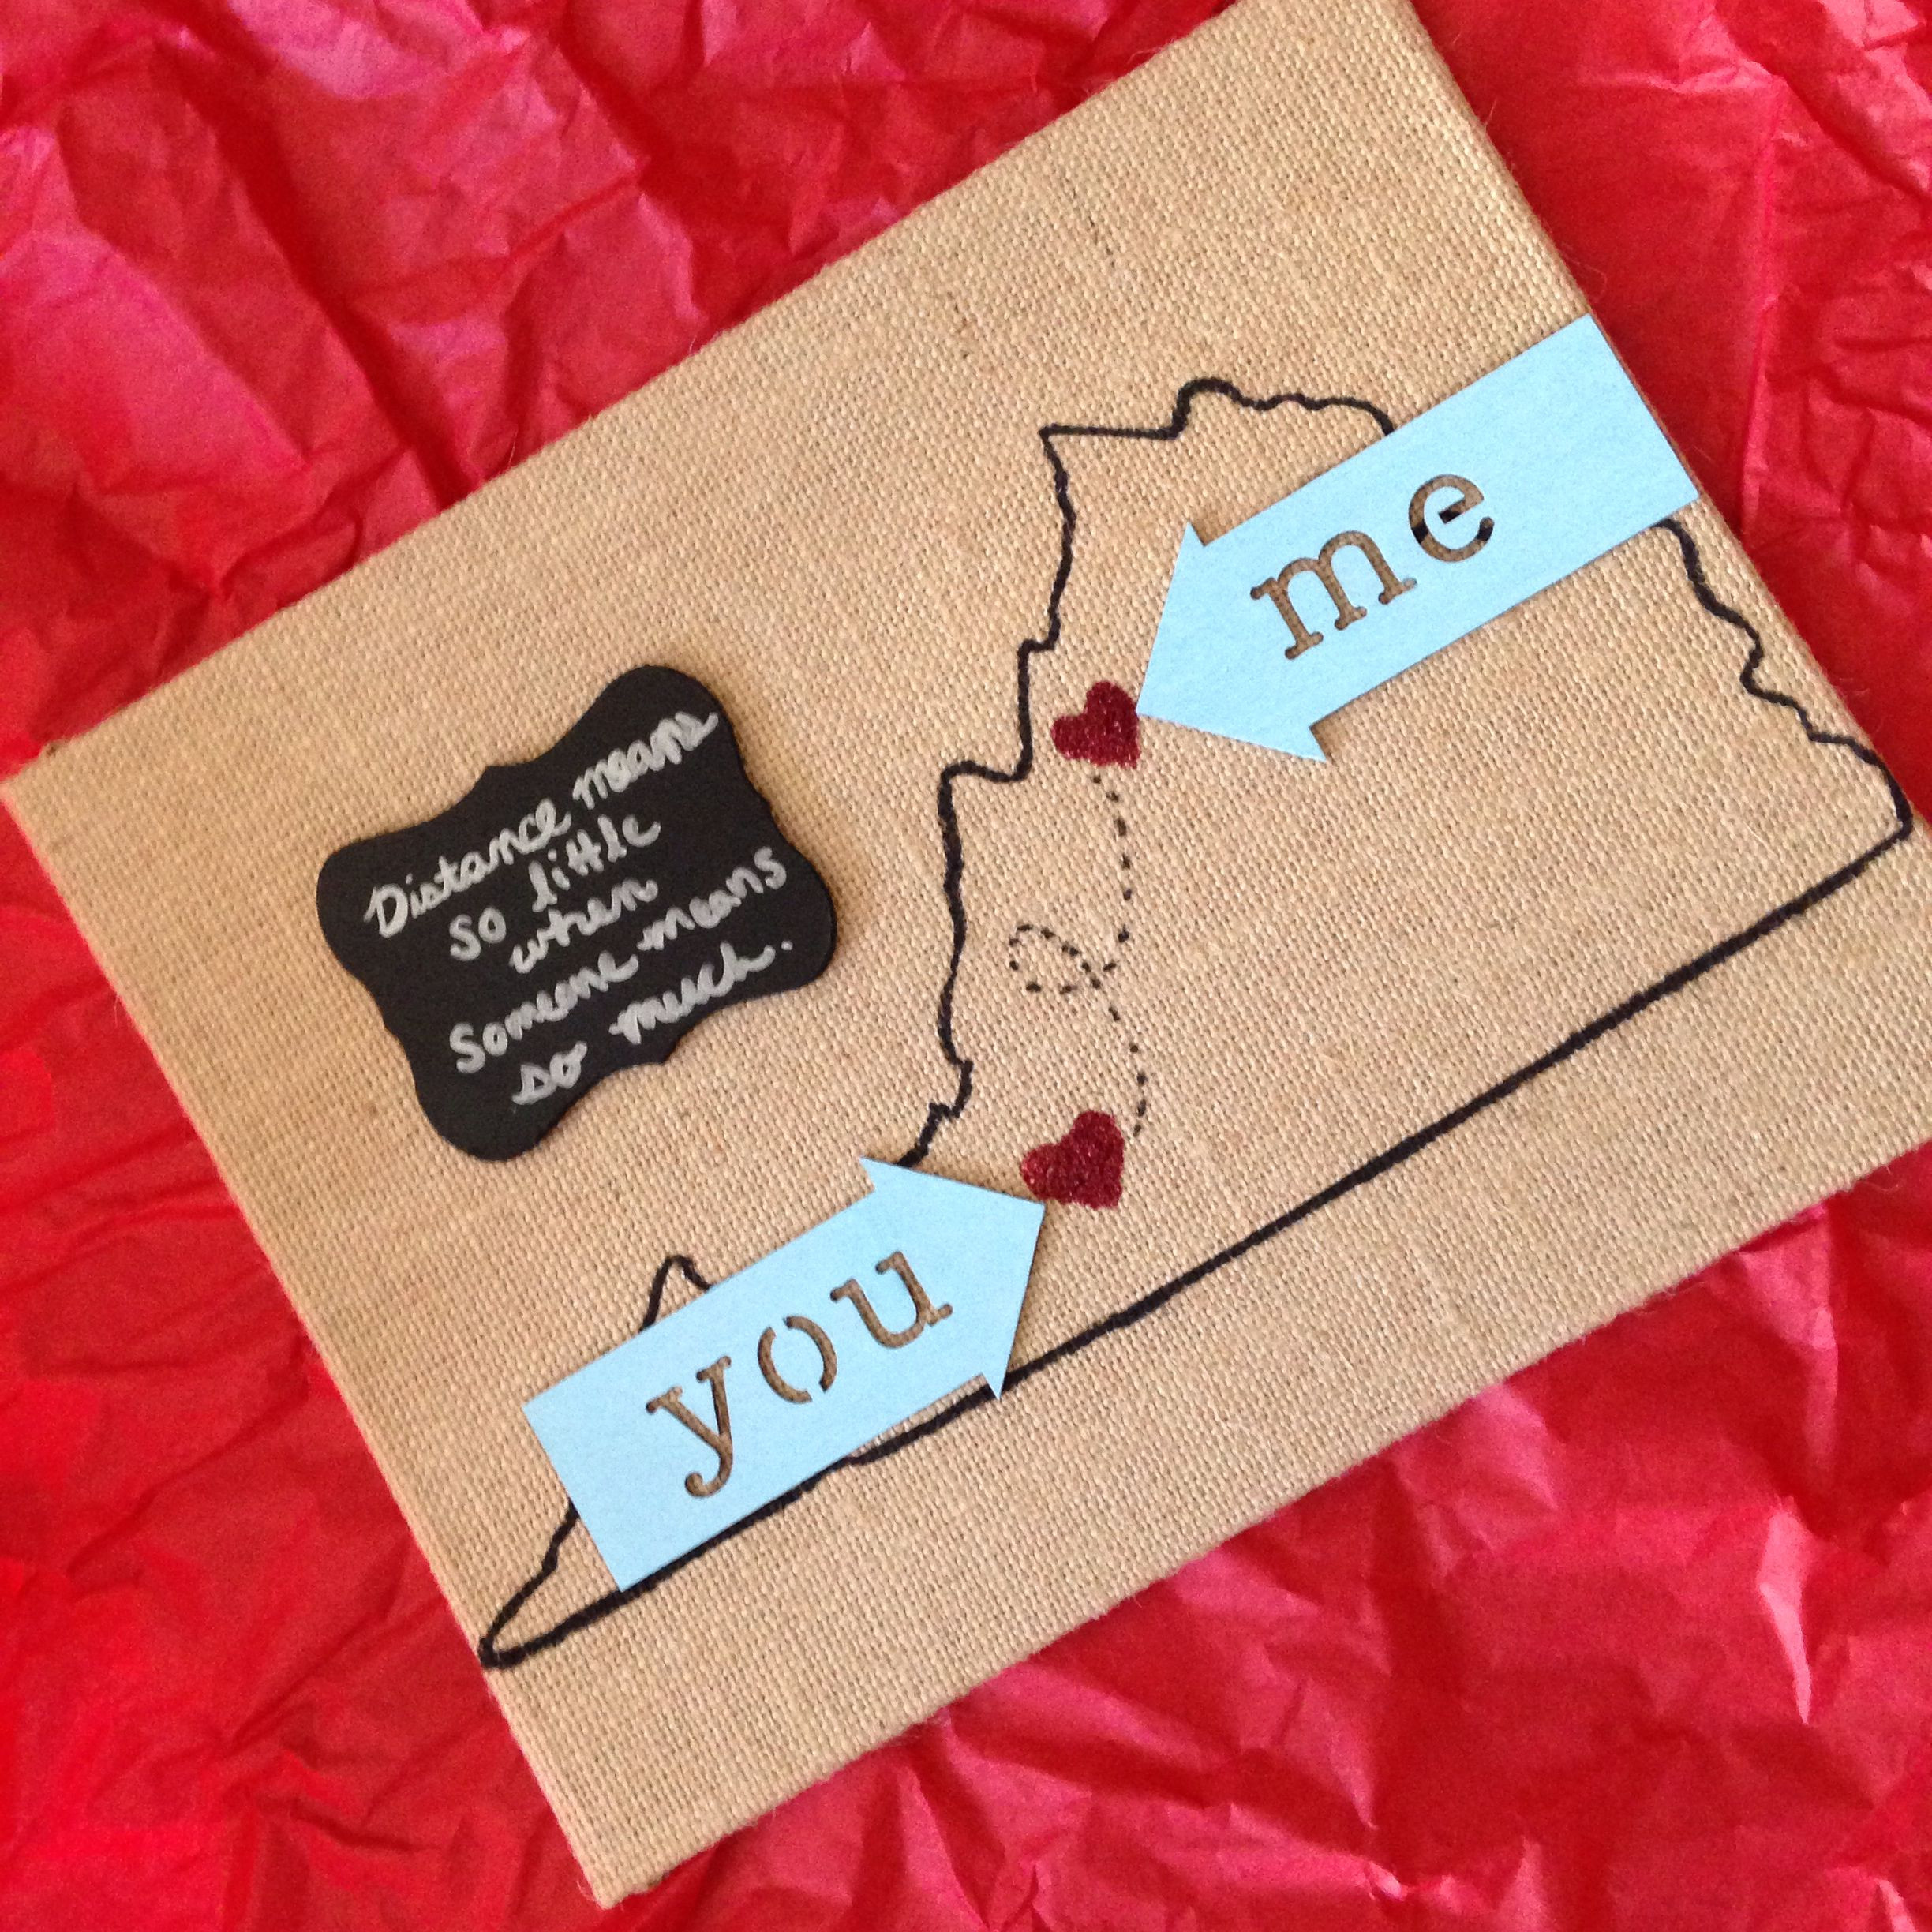 Long Distance Relationship Gift Ideas For Boyfriend
 I m in a long distance relationship & I made this for my